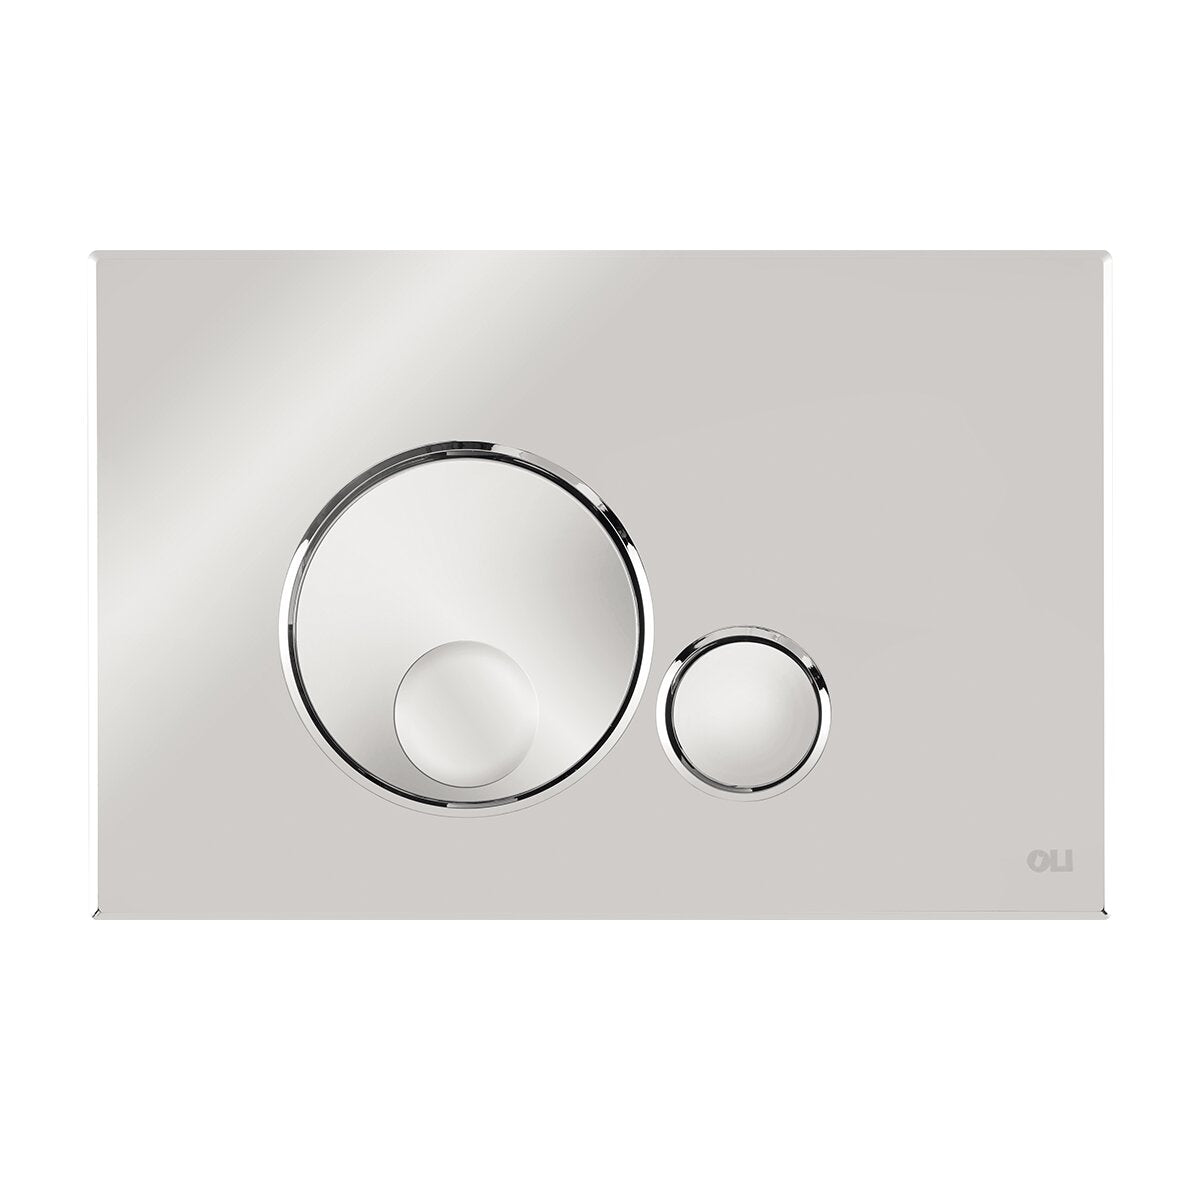 OLI GLOBE double button plate in polished chrome